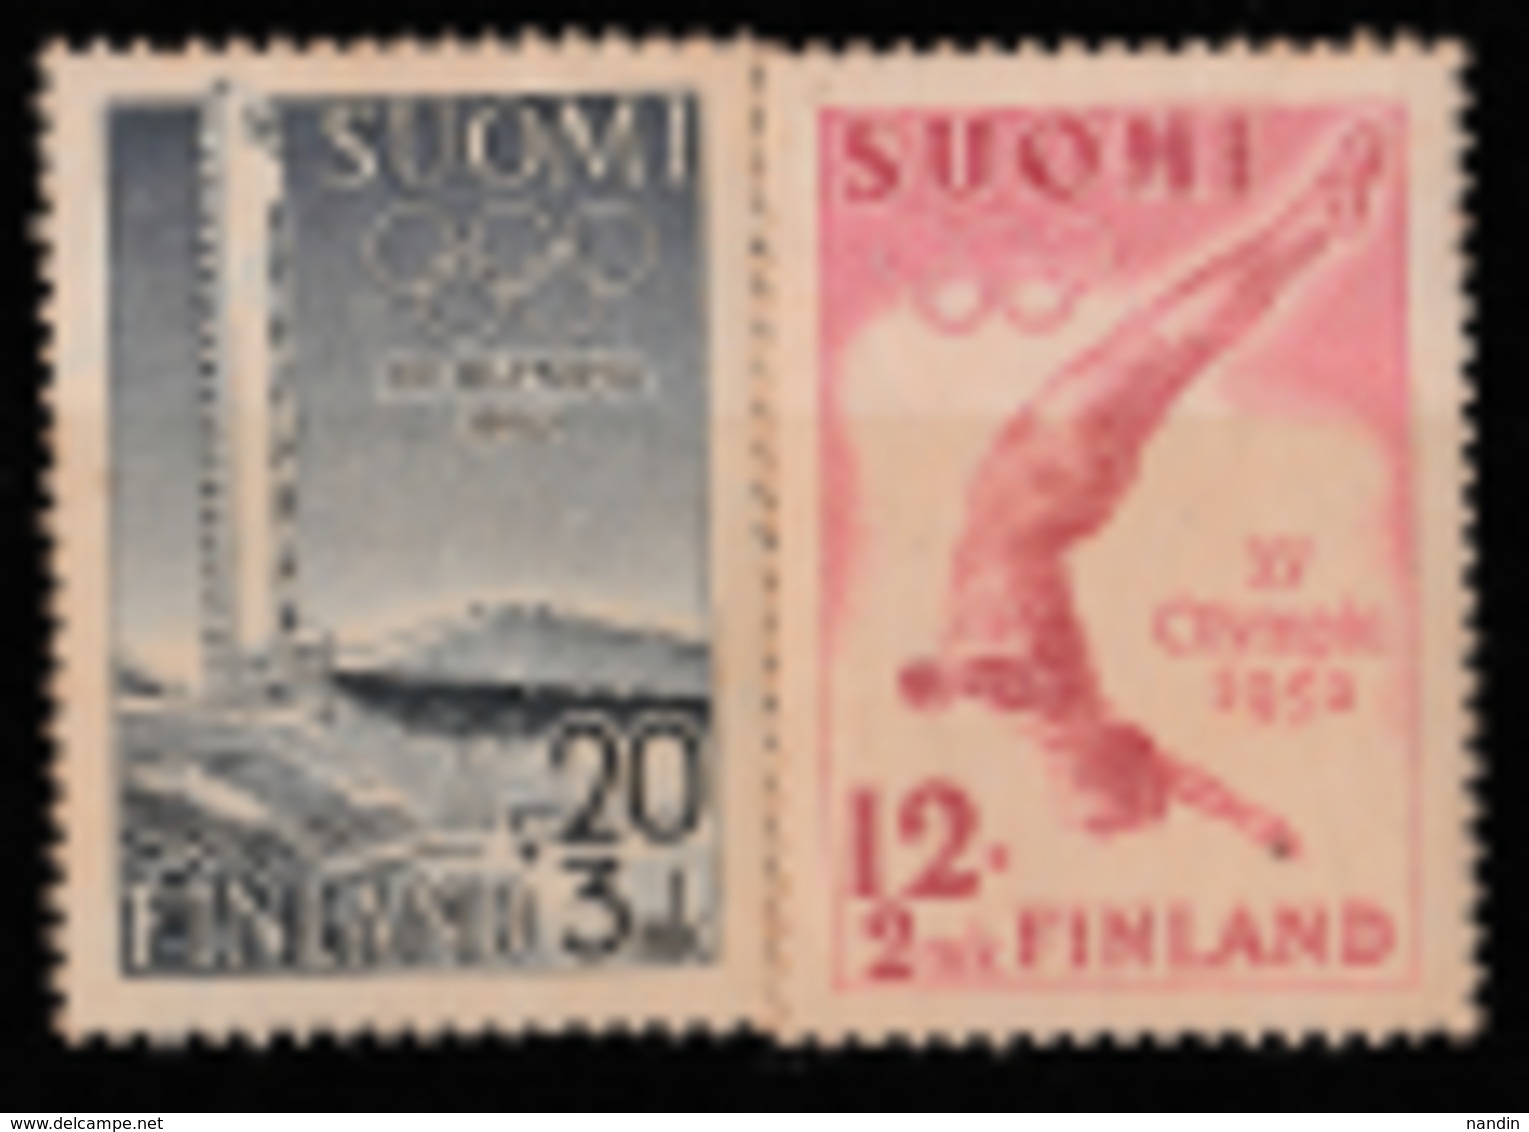 1952 HELSINKI OLYMPIC MNH STAMP  FROM FINLAND /SPORTS / DIVING/STADIUM /(INCOMPLETE SET,GUM DISTURBED,CREASE) - Verano 1952: Helsinki